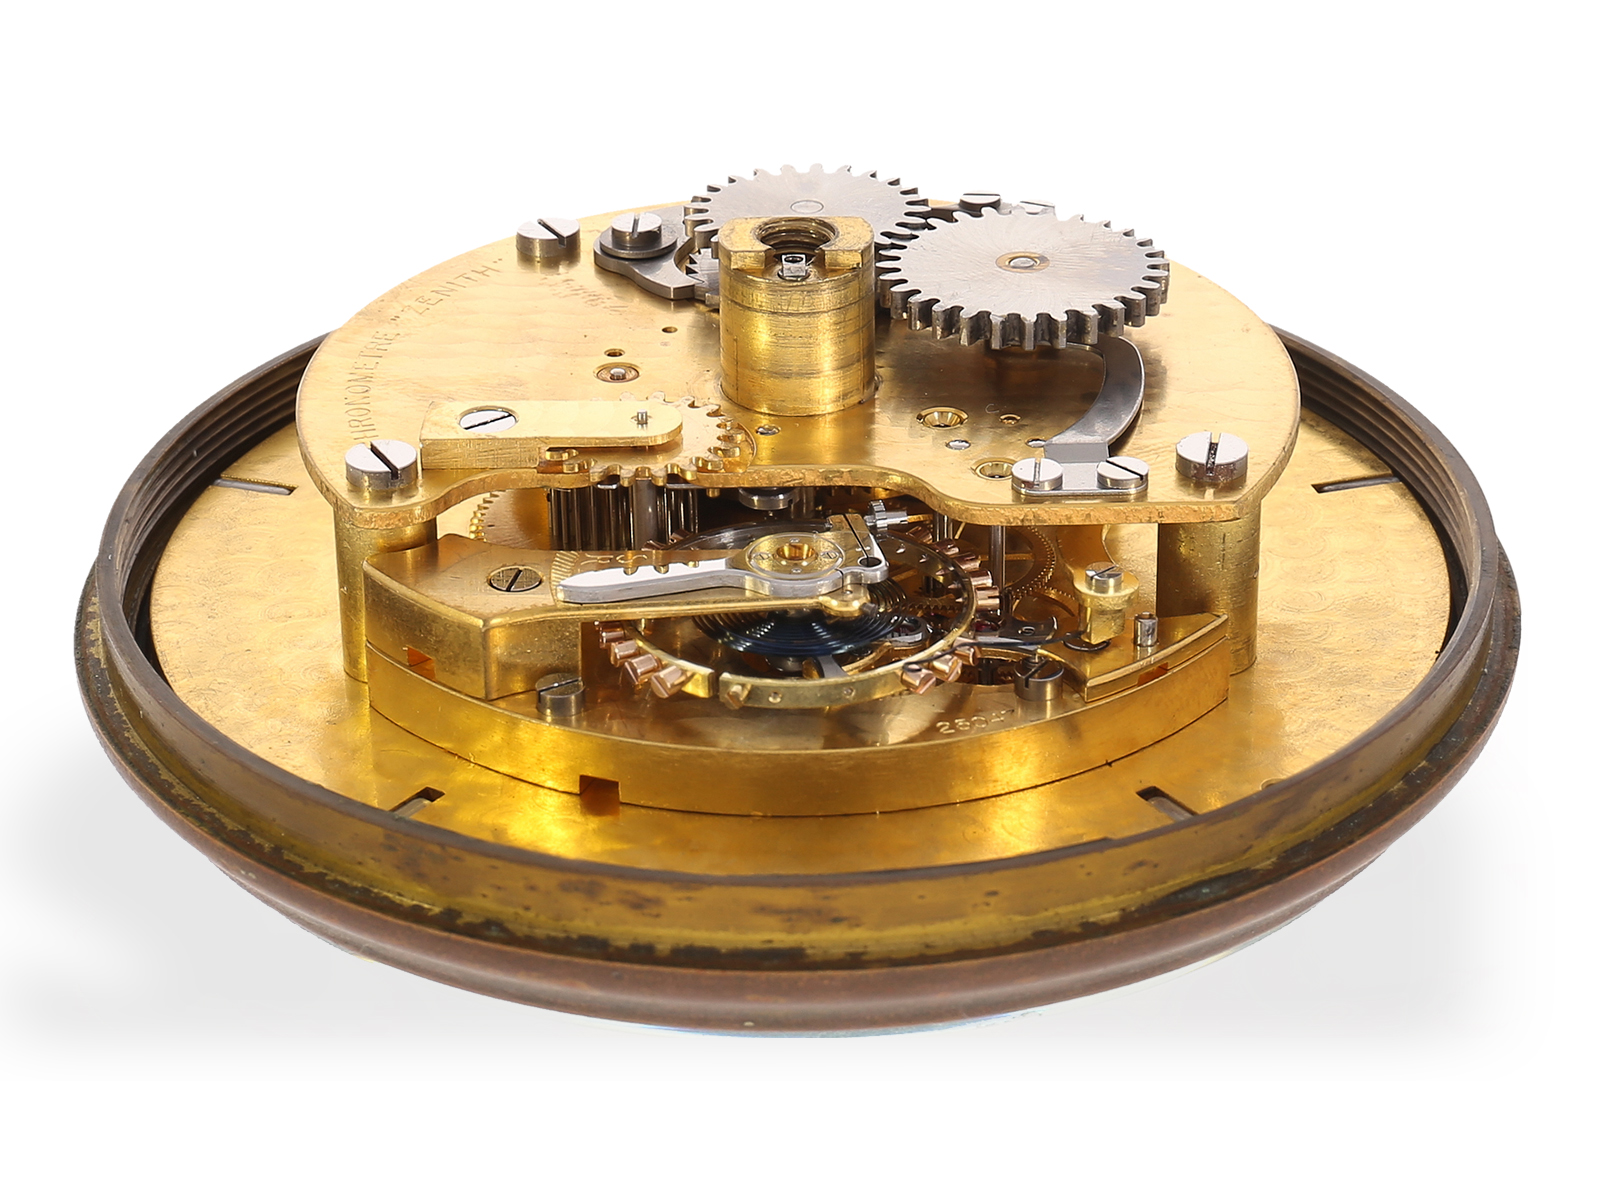 Excellently preserved Zenith marine chronometer, 1930s - Image 7 of 7